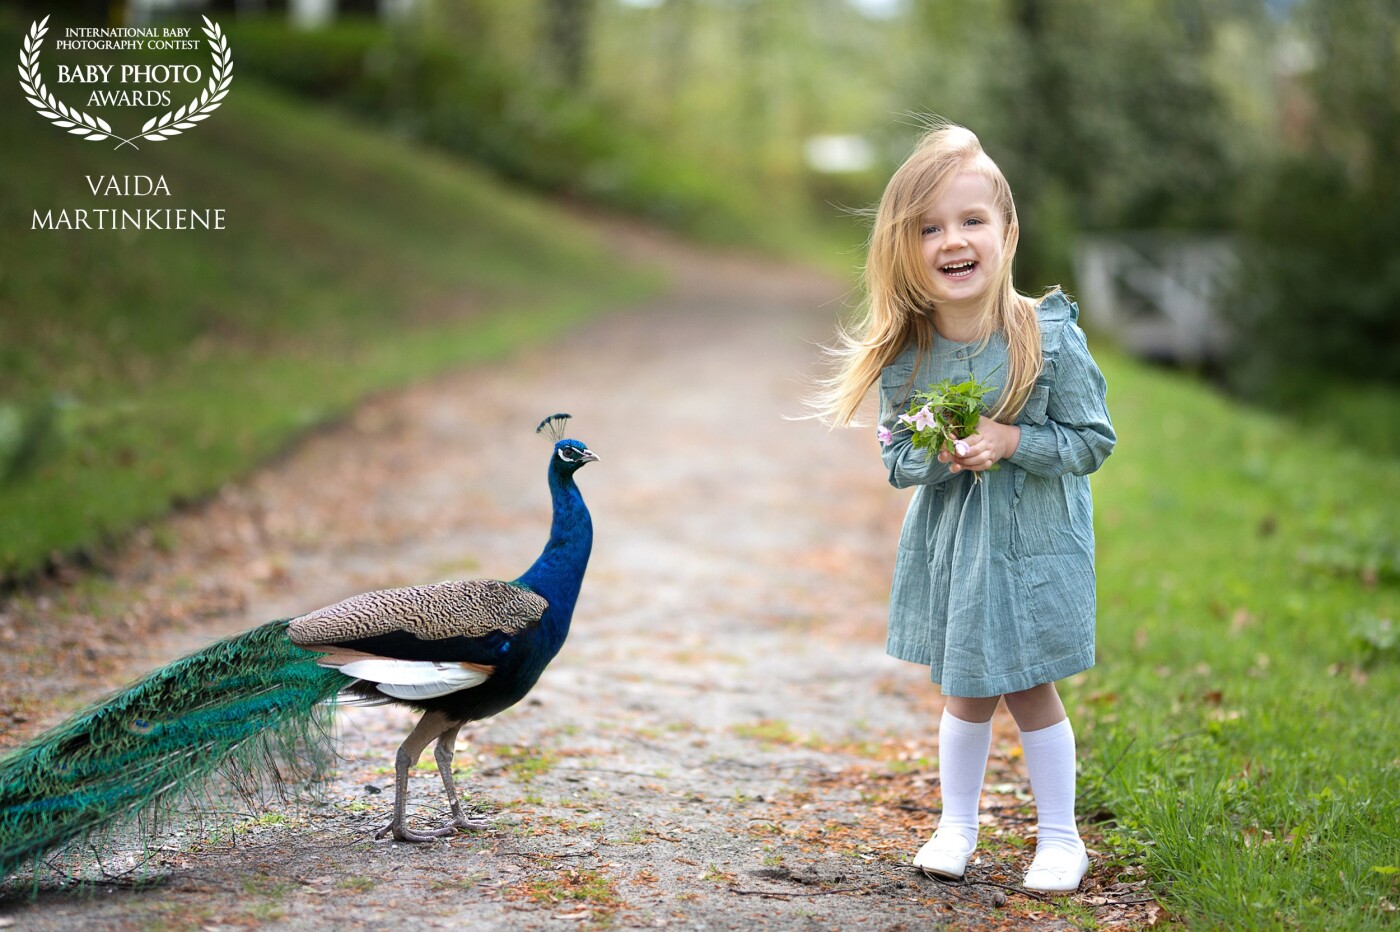 This photo session took place in one of Norway's beautiful Manor. In this manor, the peacocks walk freely among the people. This beautiful peacock became our friend after spending several hours in this manor. He followed us all the way to the gate to say goodbye :)